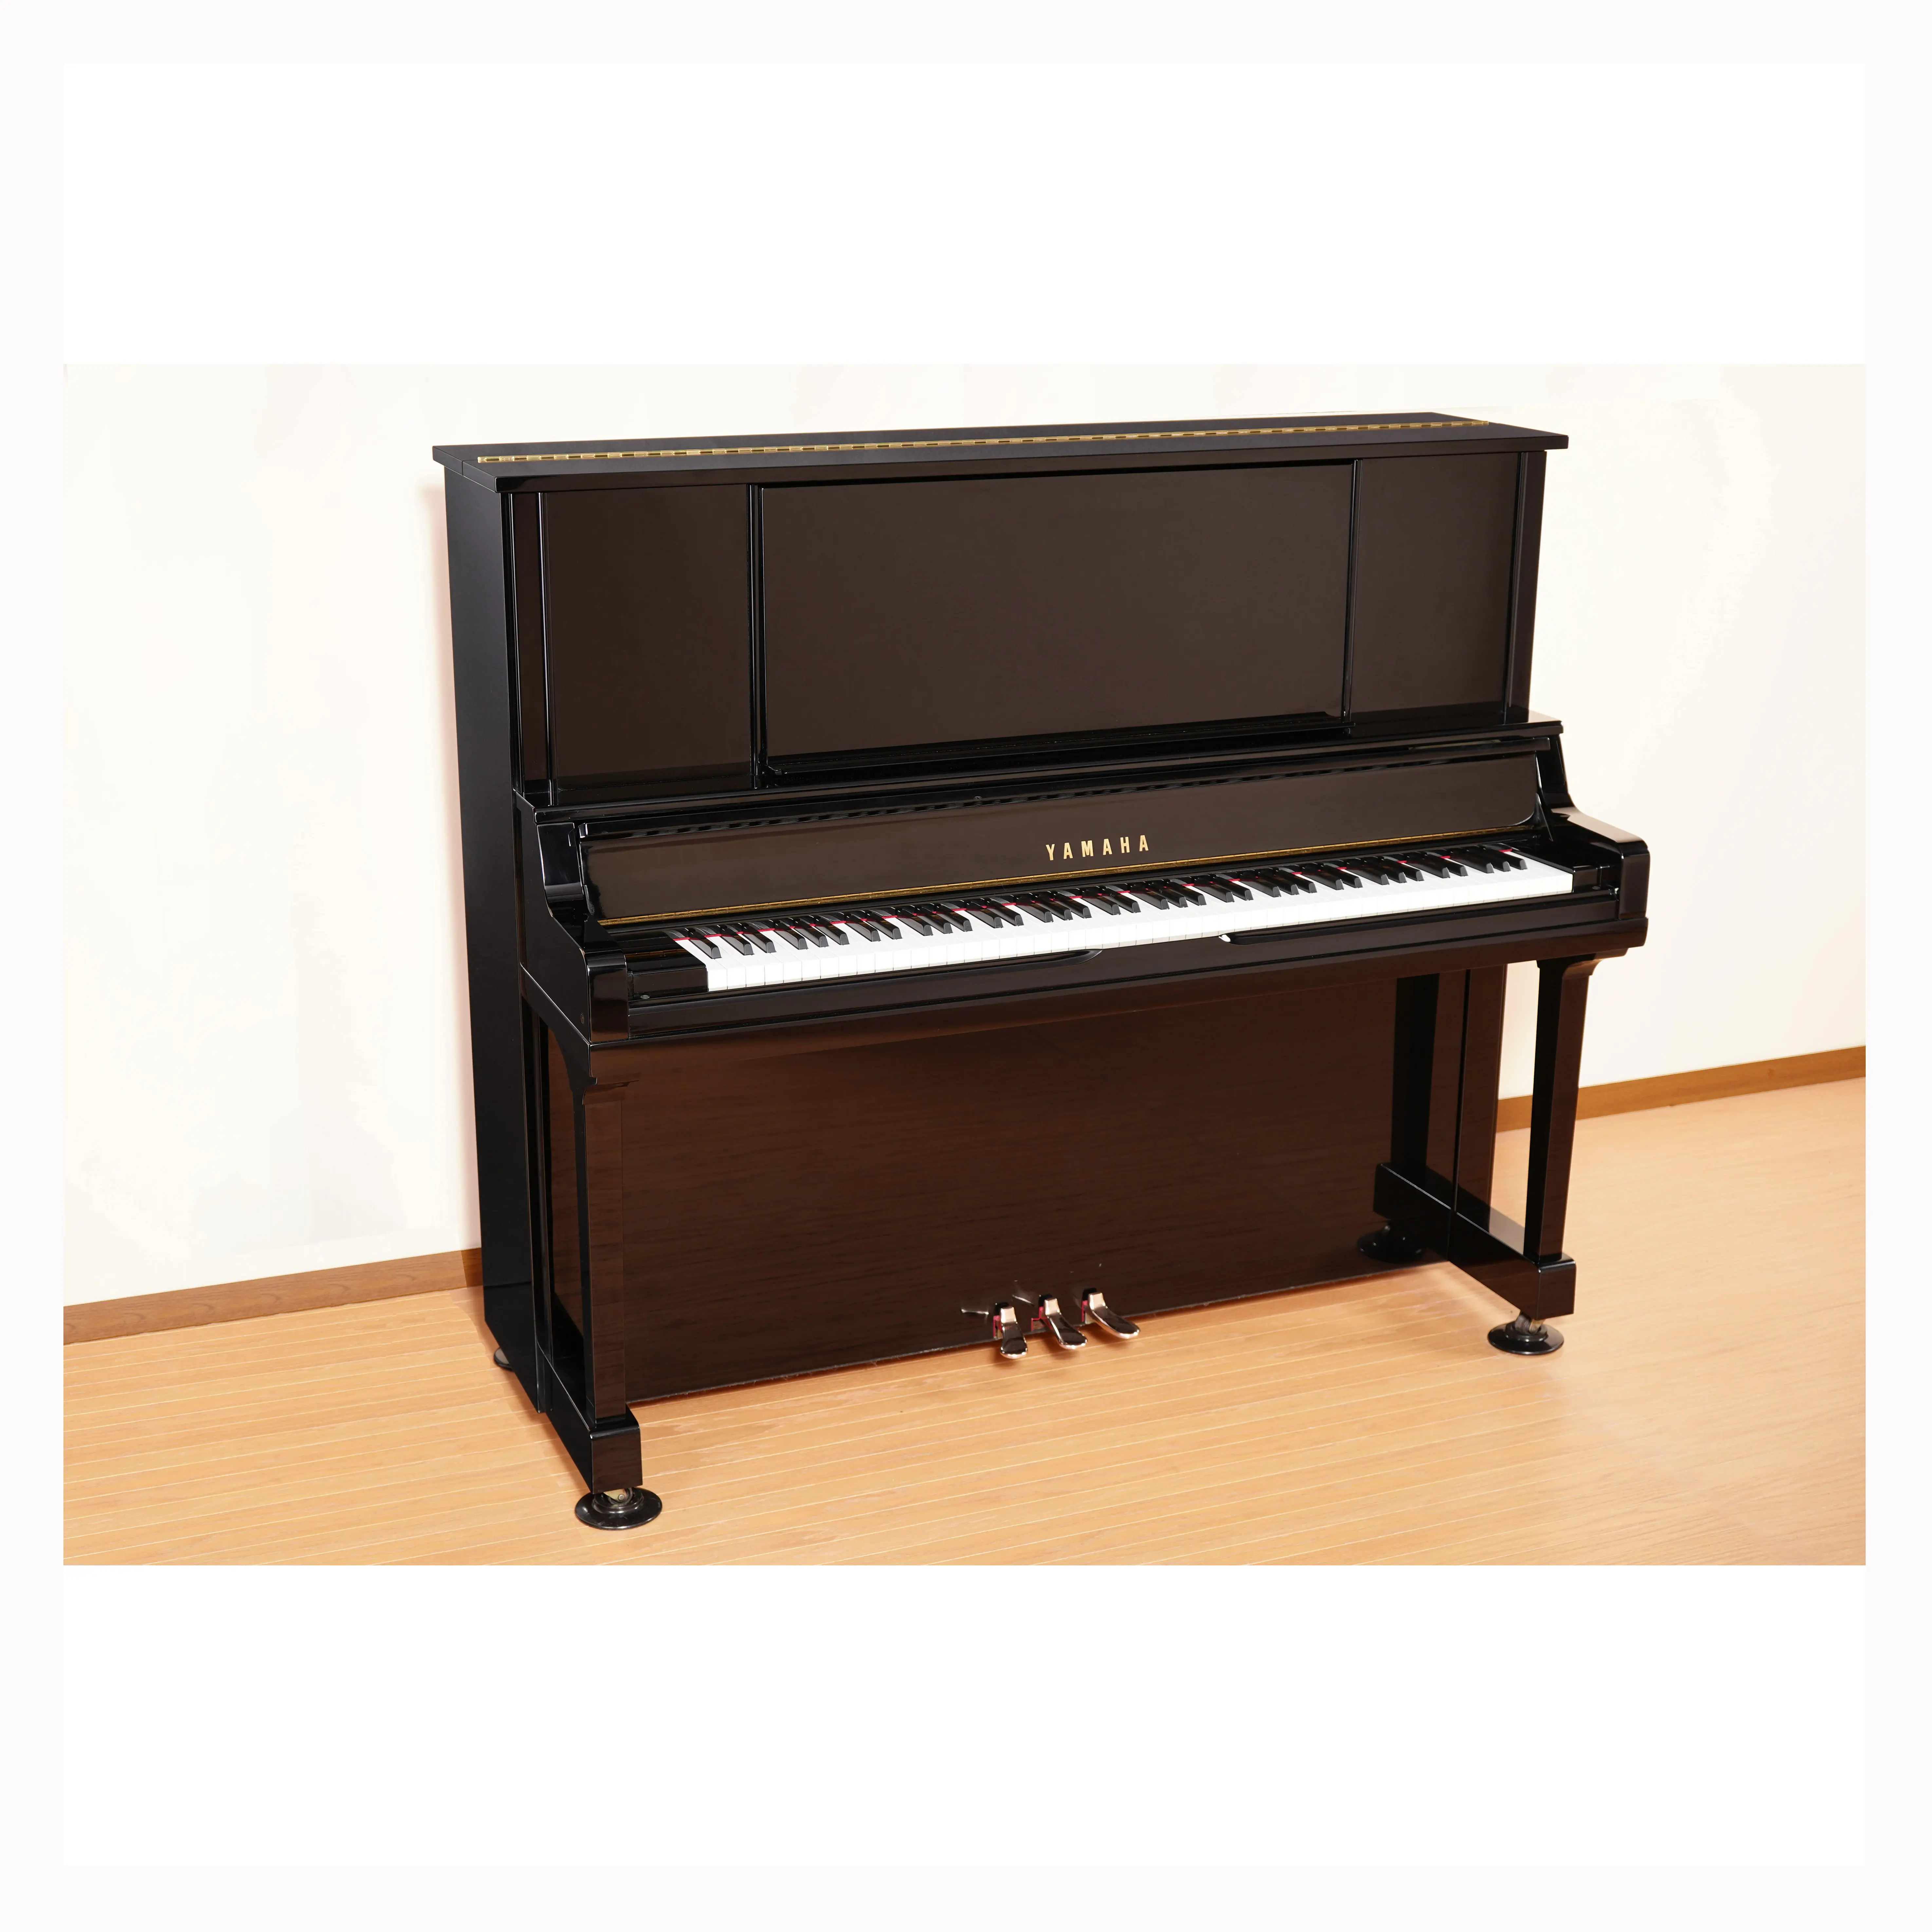 Japan used 1990 and 1994 manufactured by YAMAHA musical instrument types piano